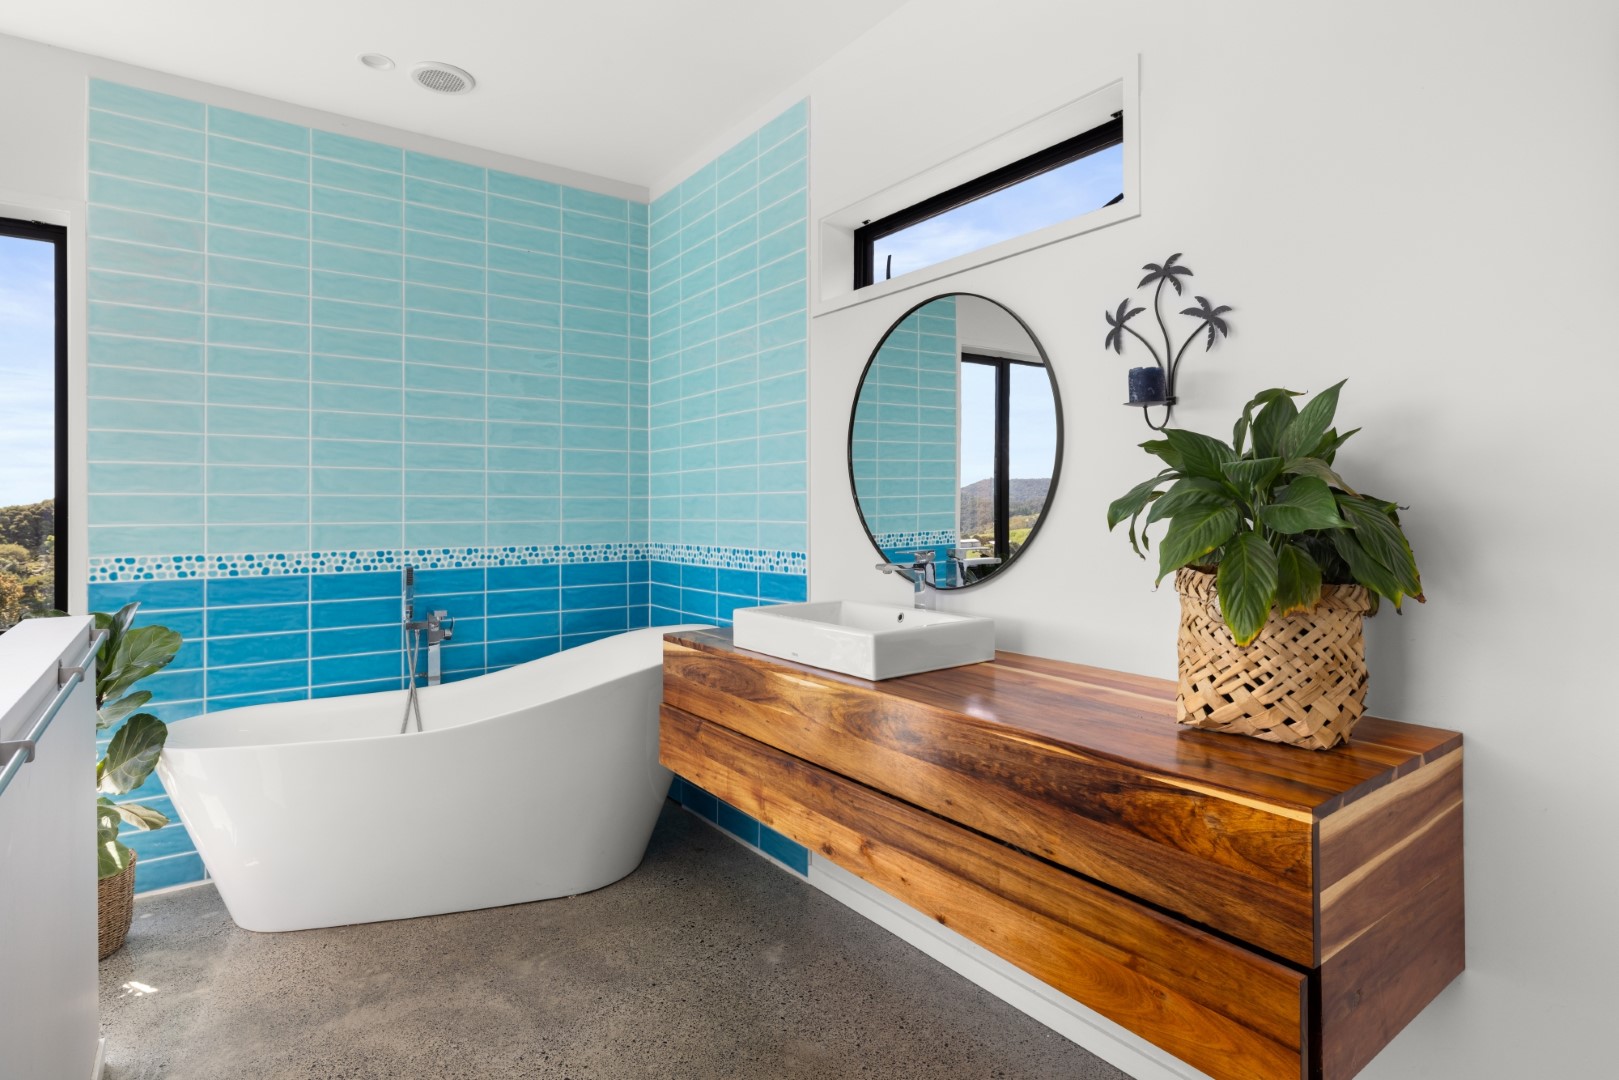 white-bathroom-wood-vanity-shower-layout-blue-tiles-arcline-architecture